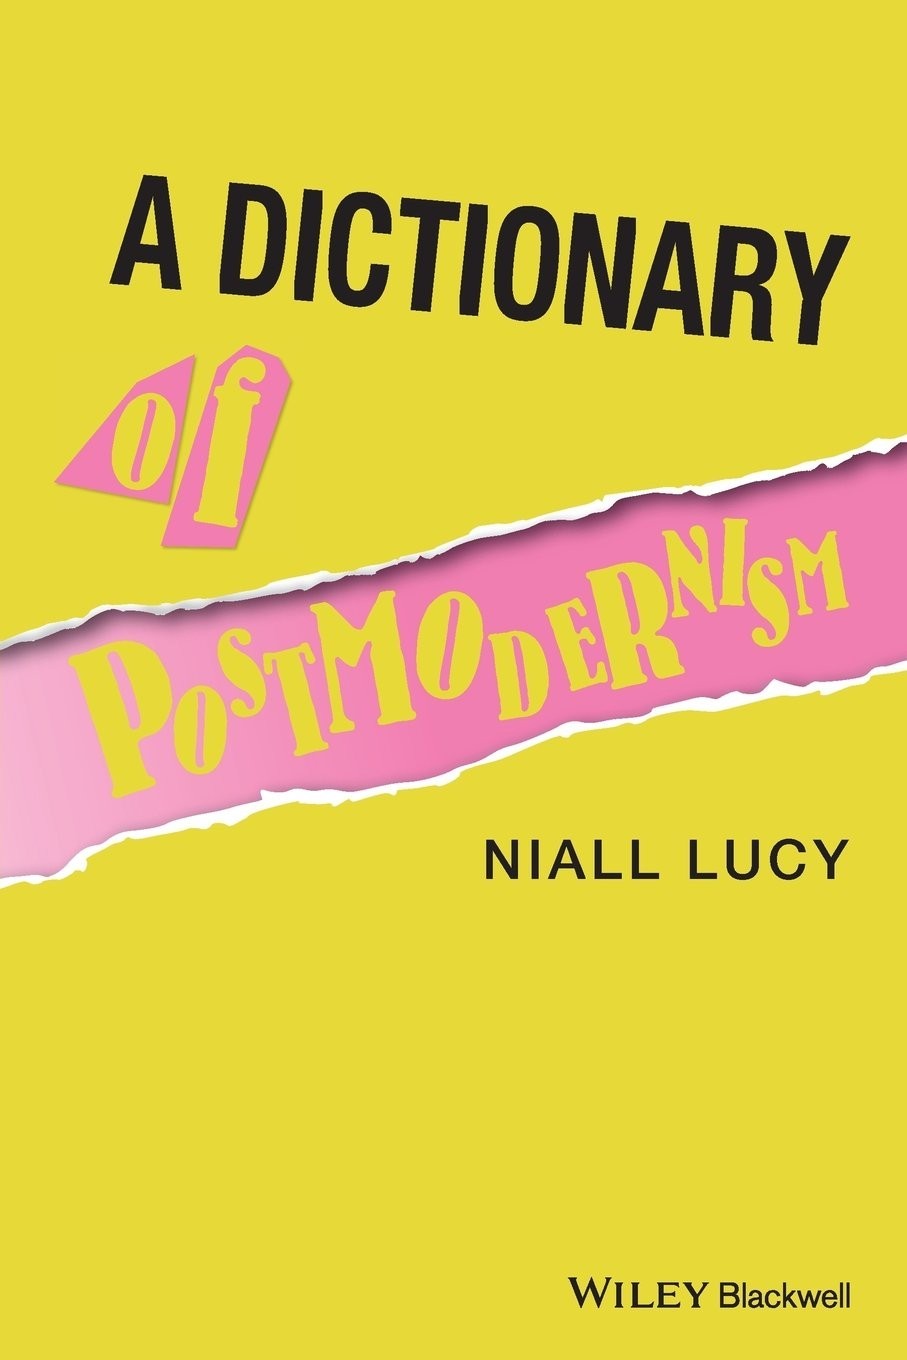 A Dictionary of Postmodernism